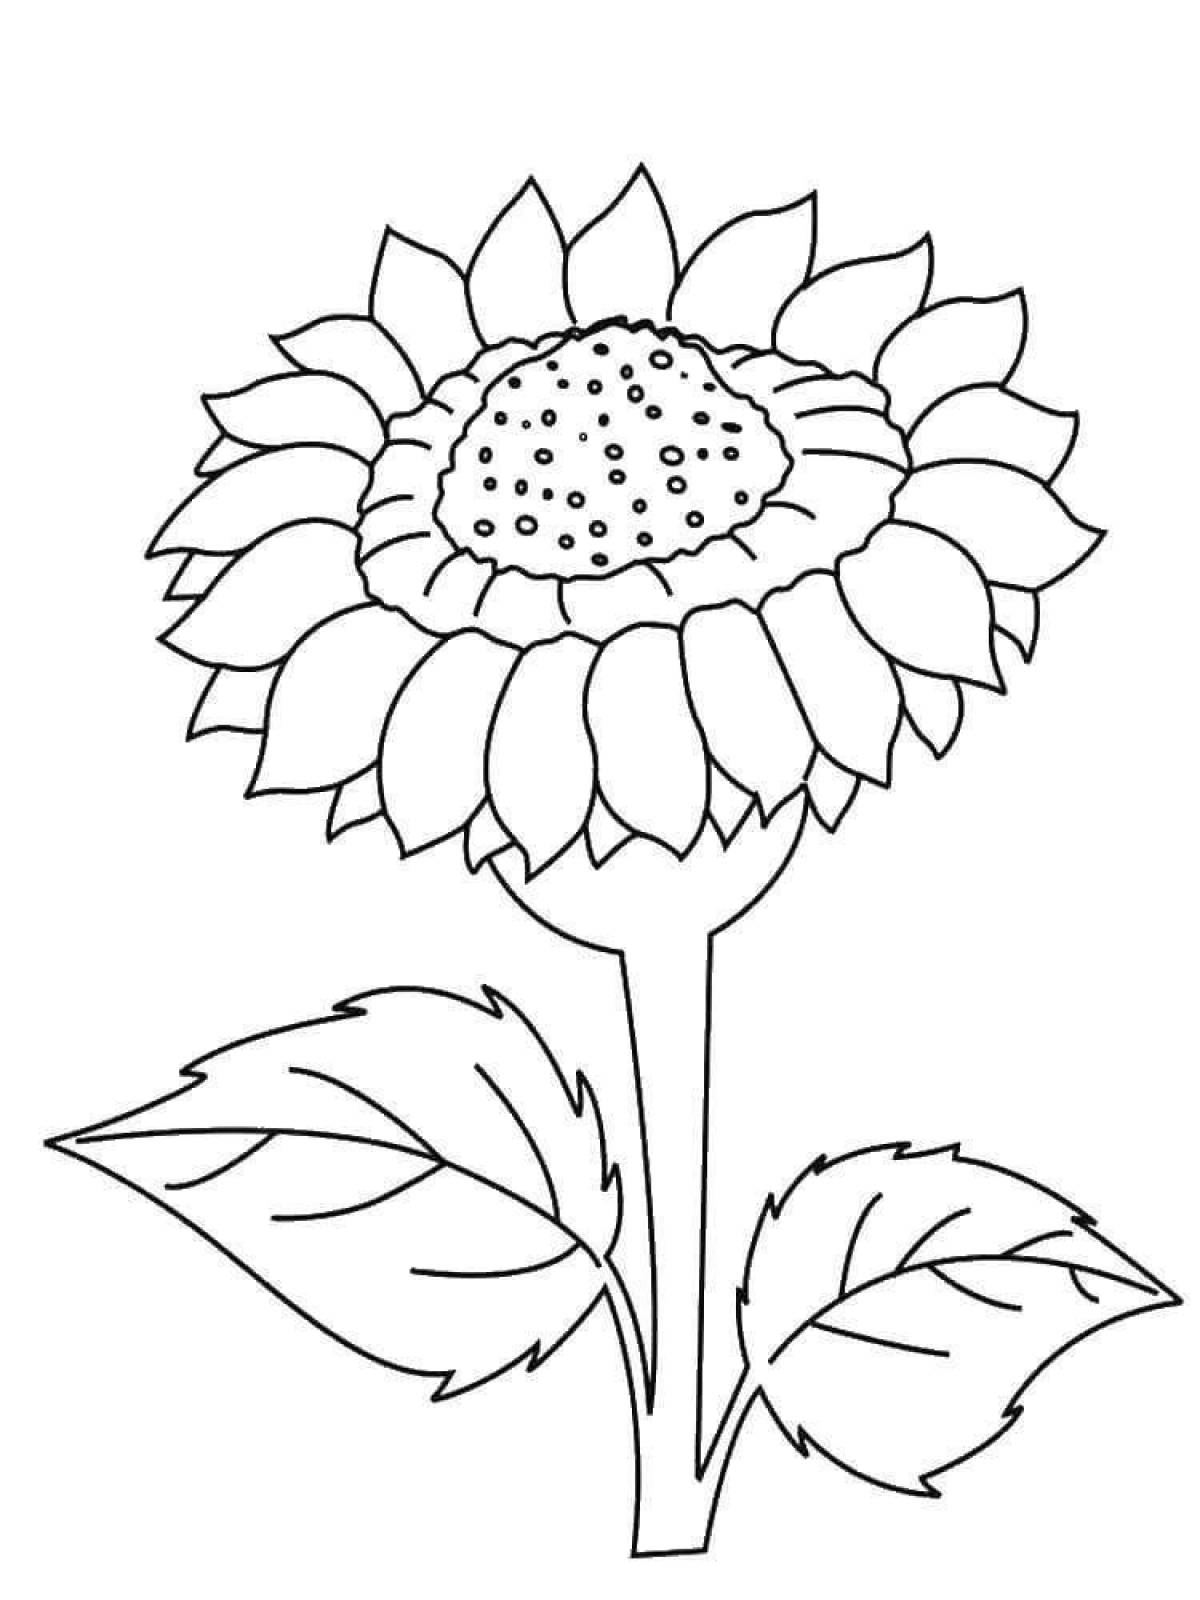 Awesome sunflower coloring pages for kids